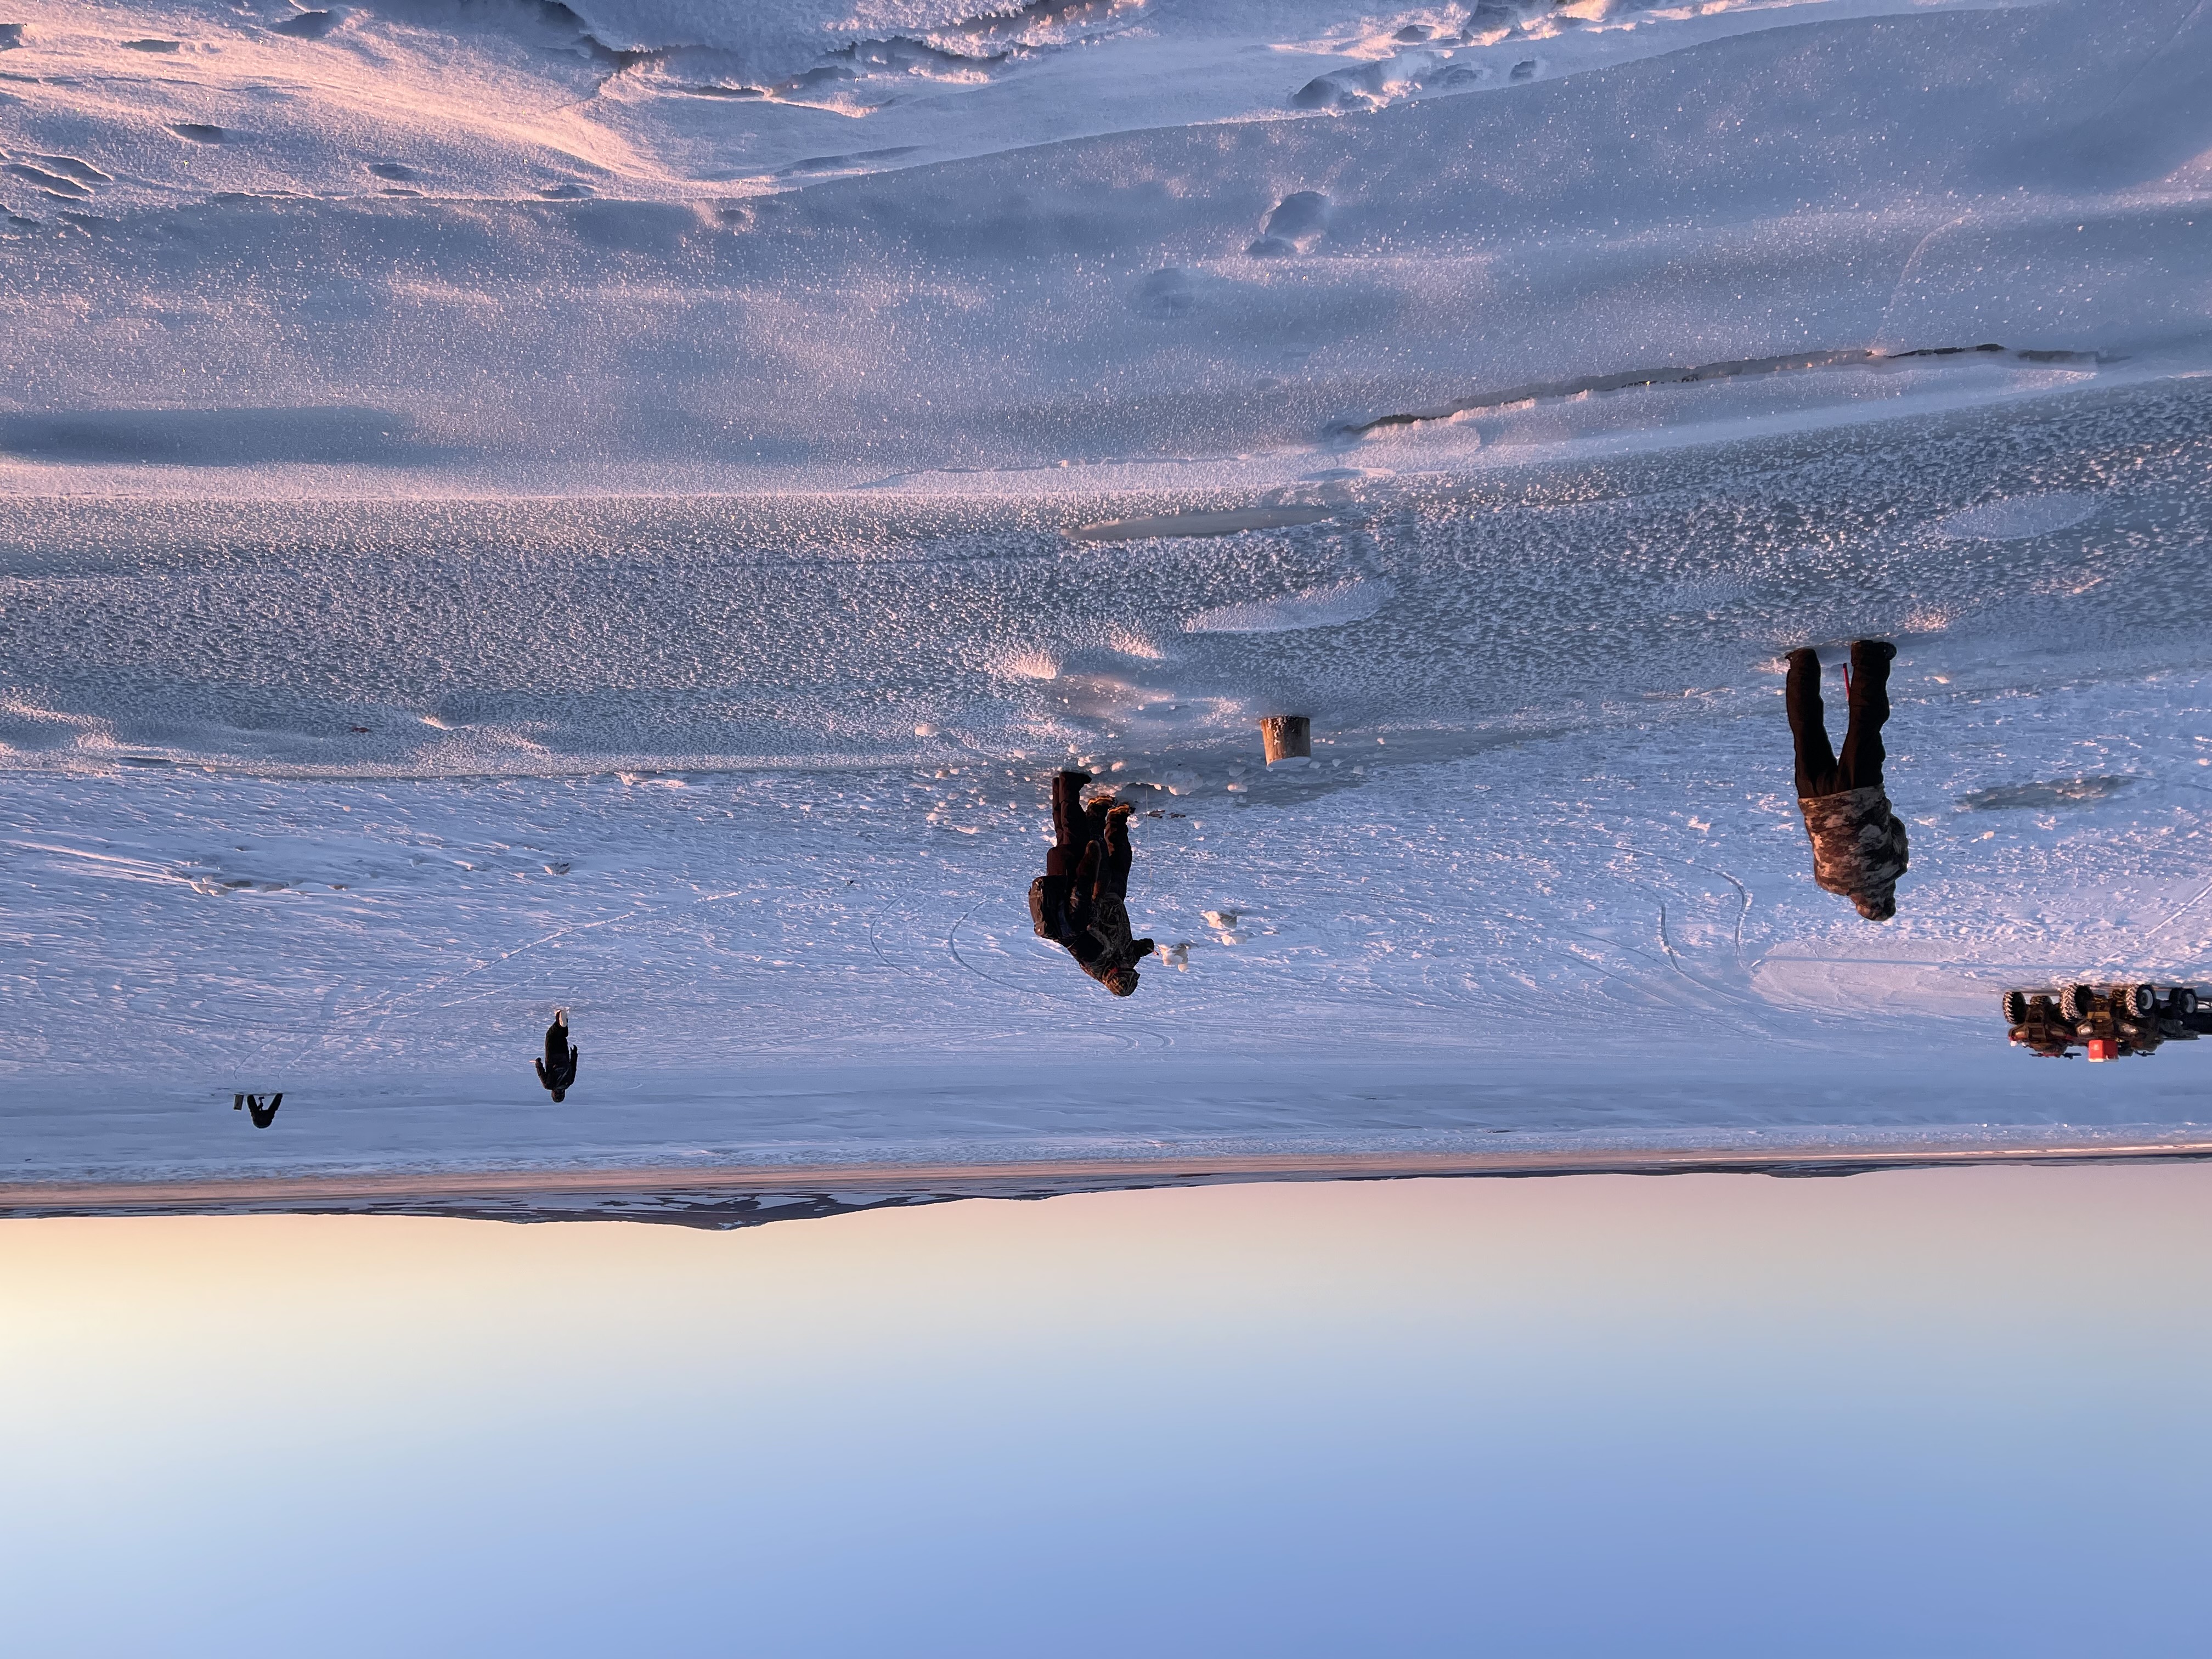 Four people spread out, from near to the horizon, ice fishing.